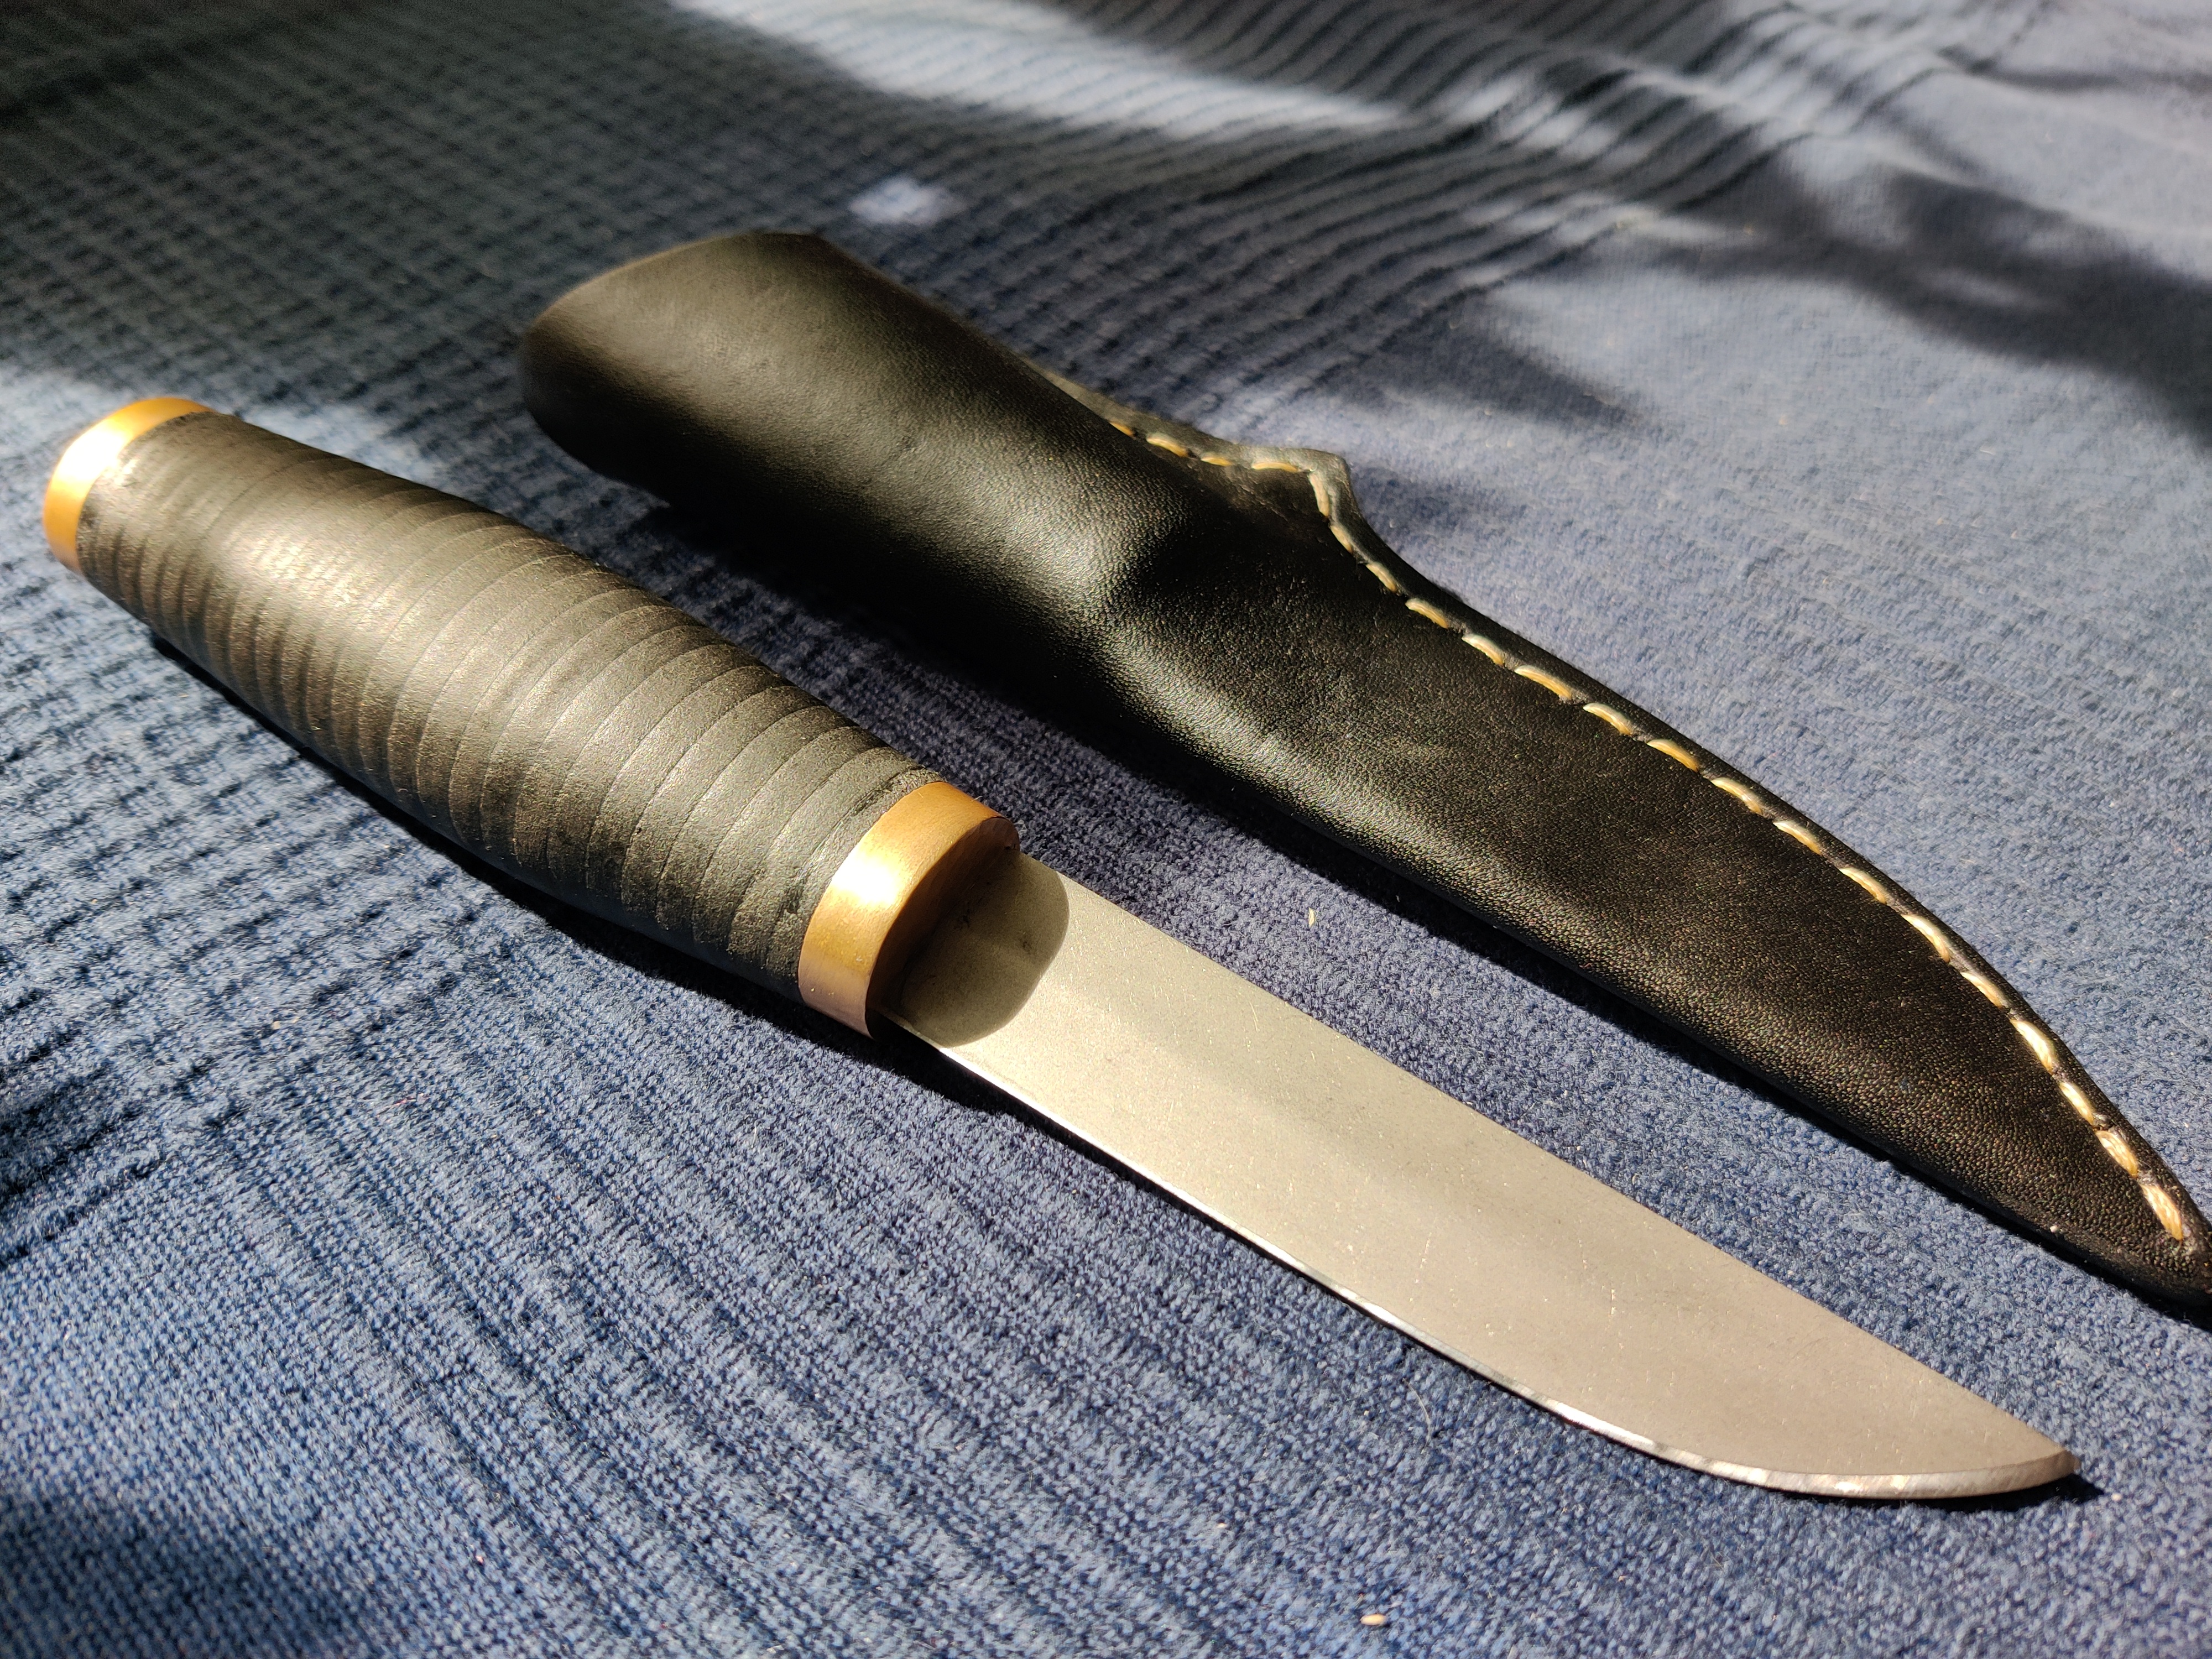 another photo of a knife and sheath